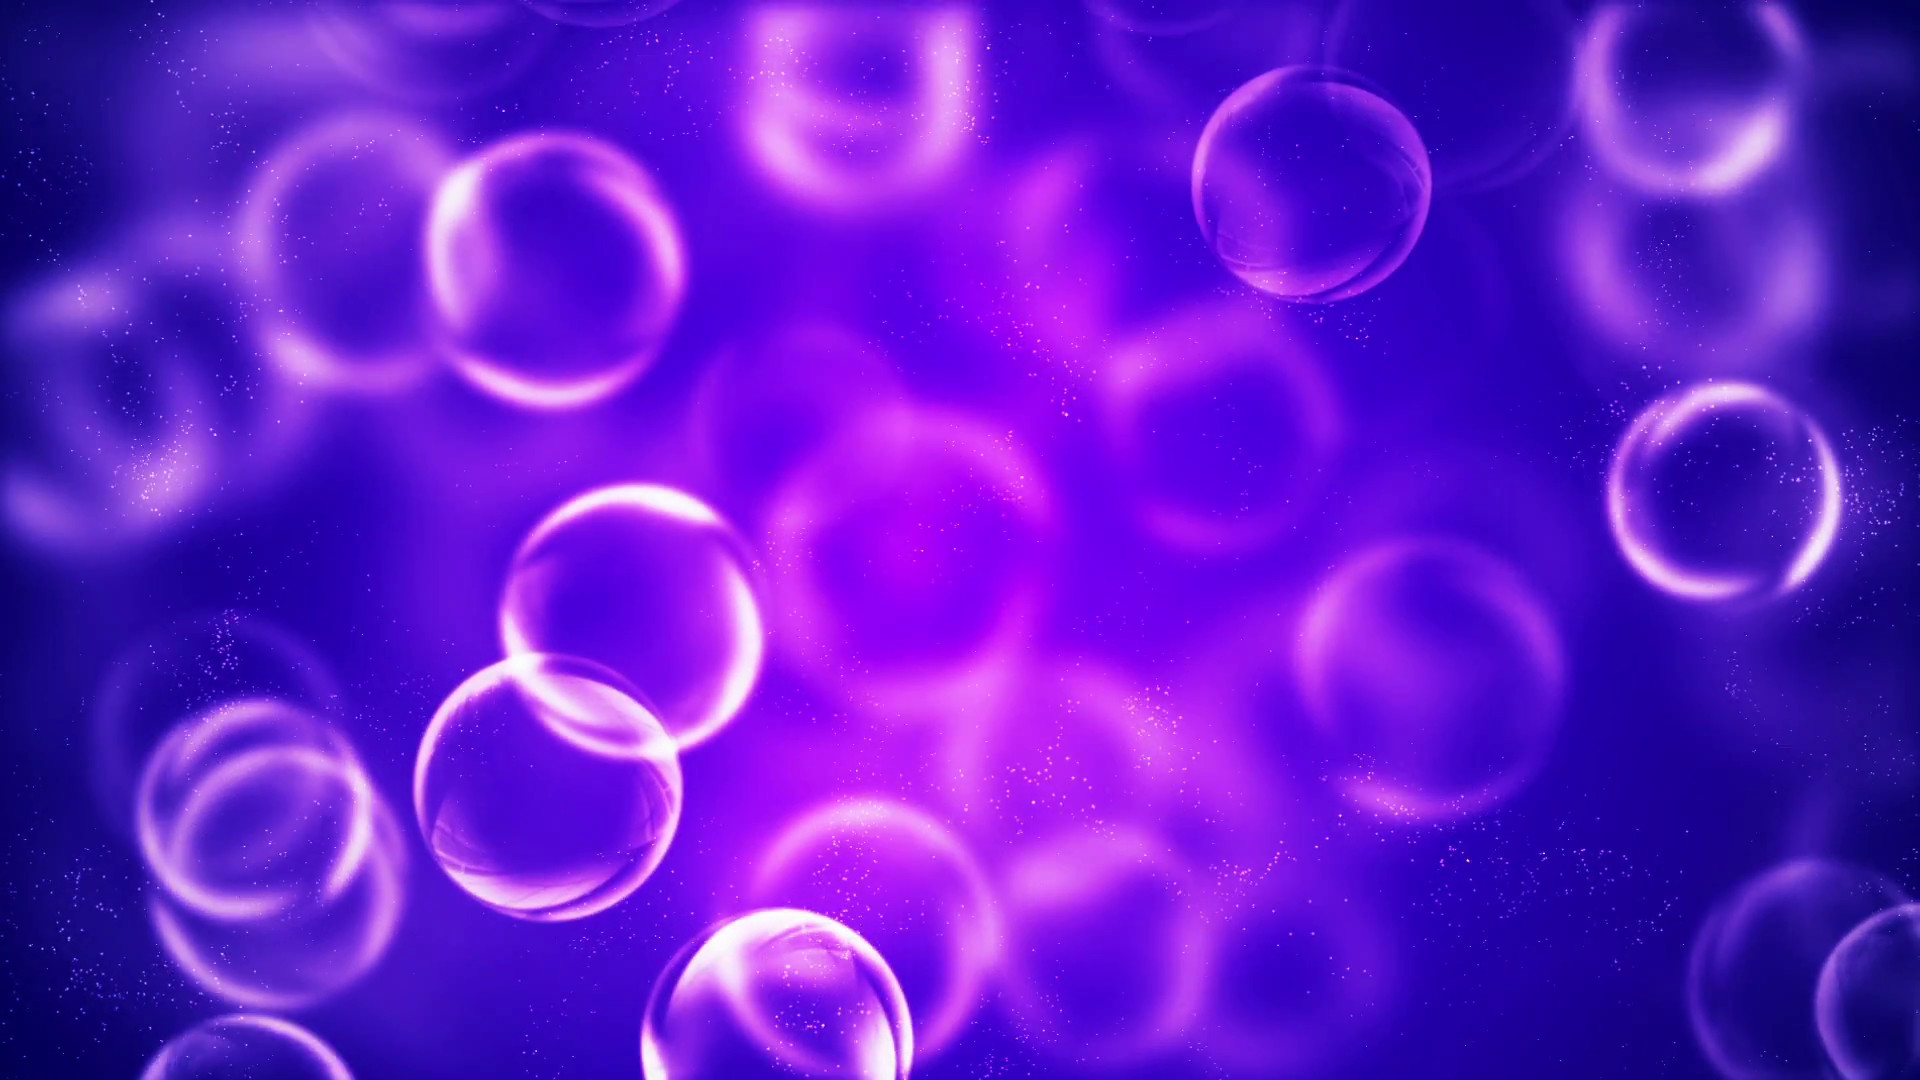 1920x1080 HD Loopable Background with nice purple bubbles Stock Video Footage -  VideoBlocks